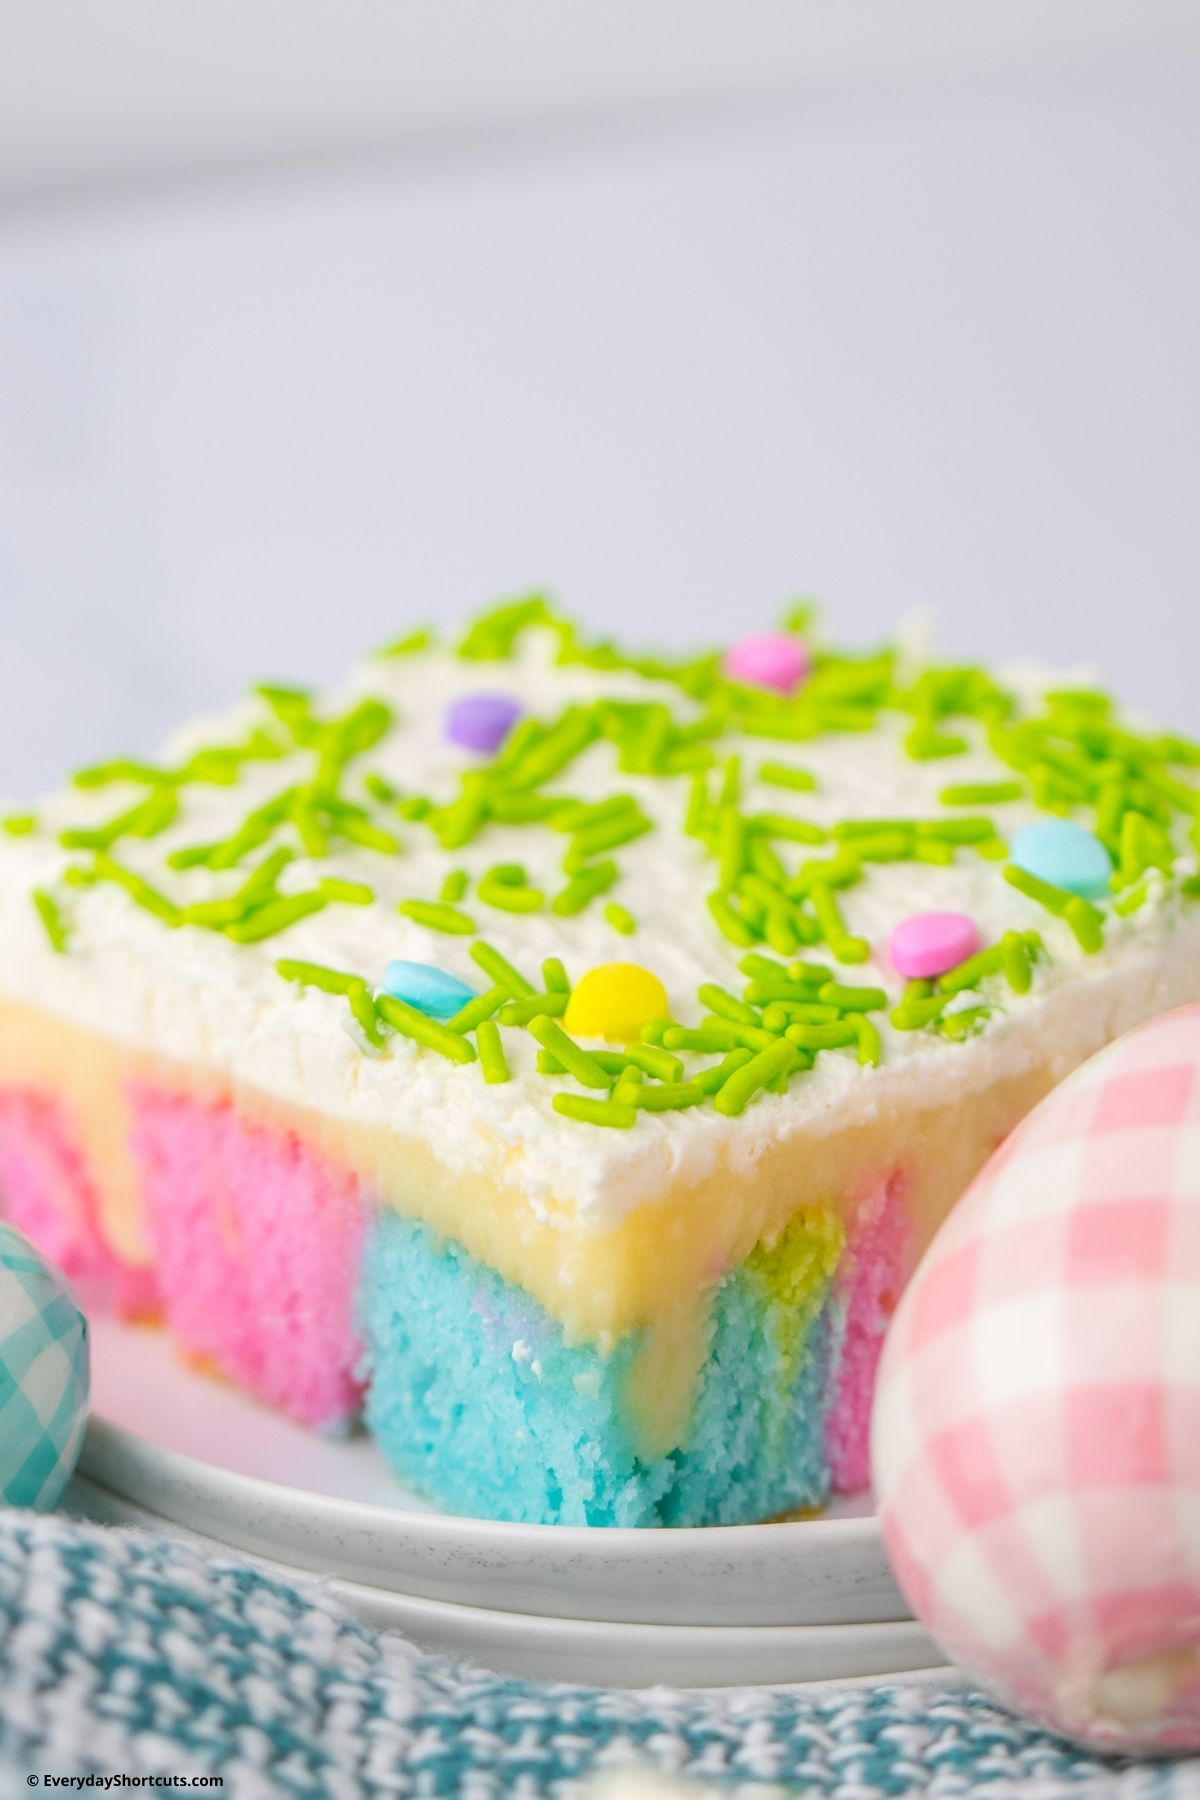 pastel colors in cake with whipped topping